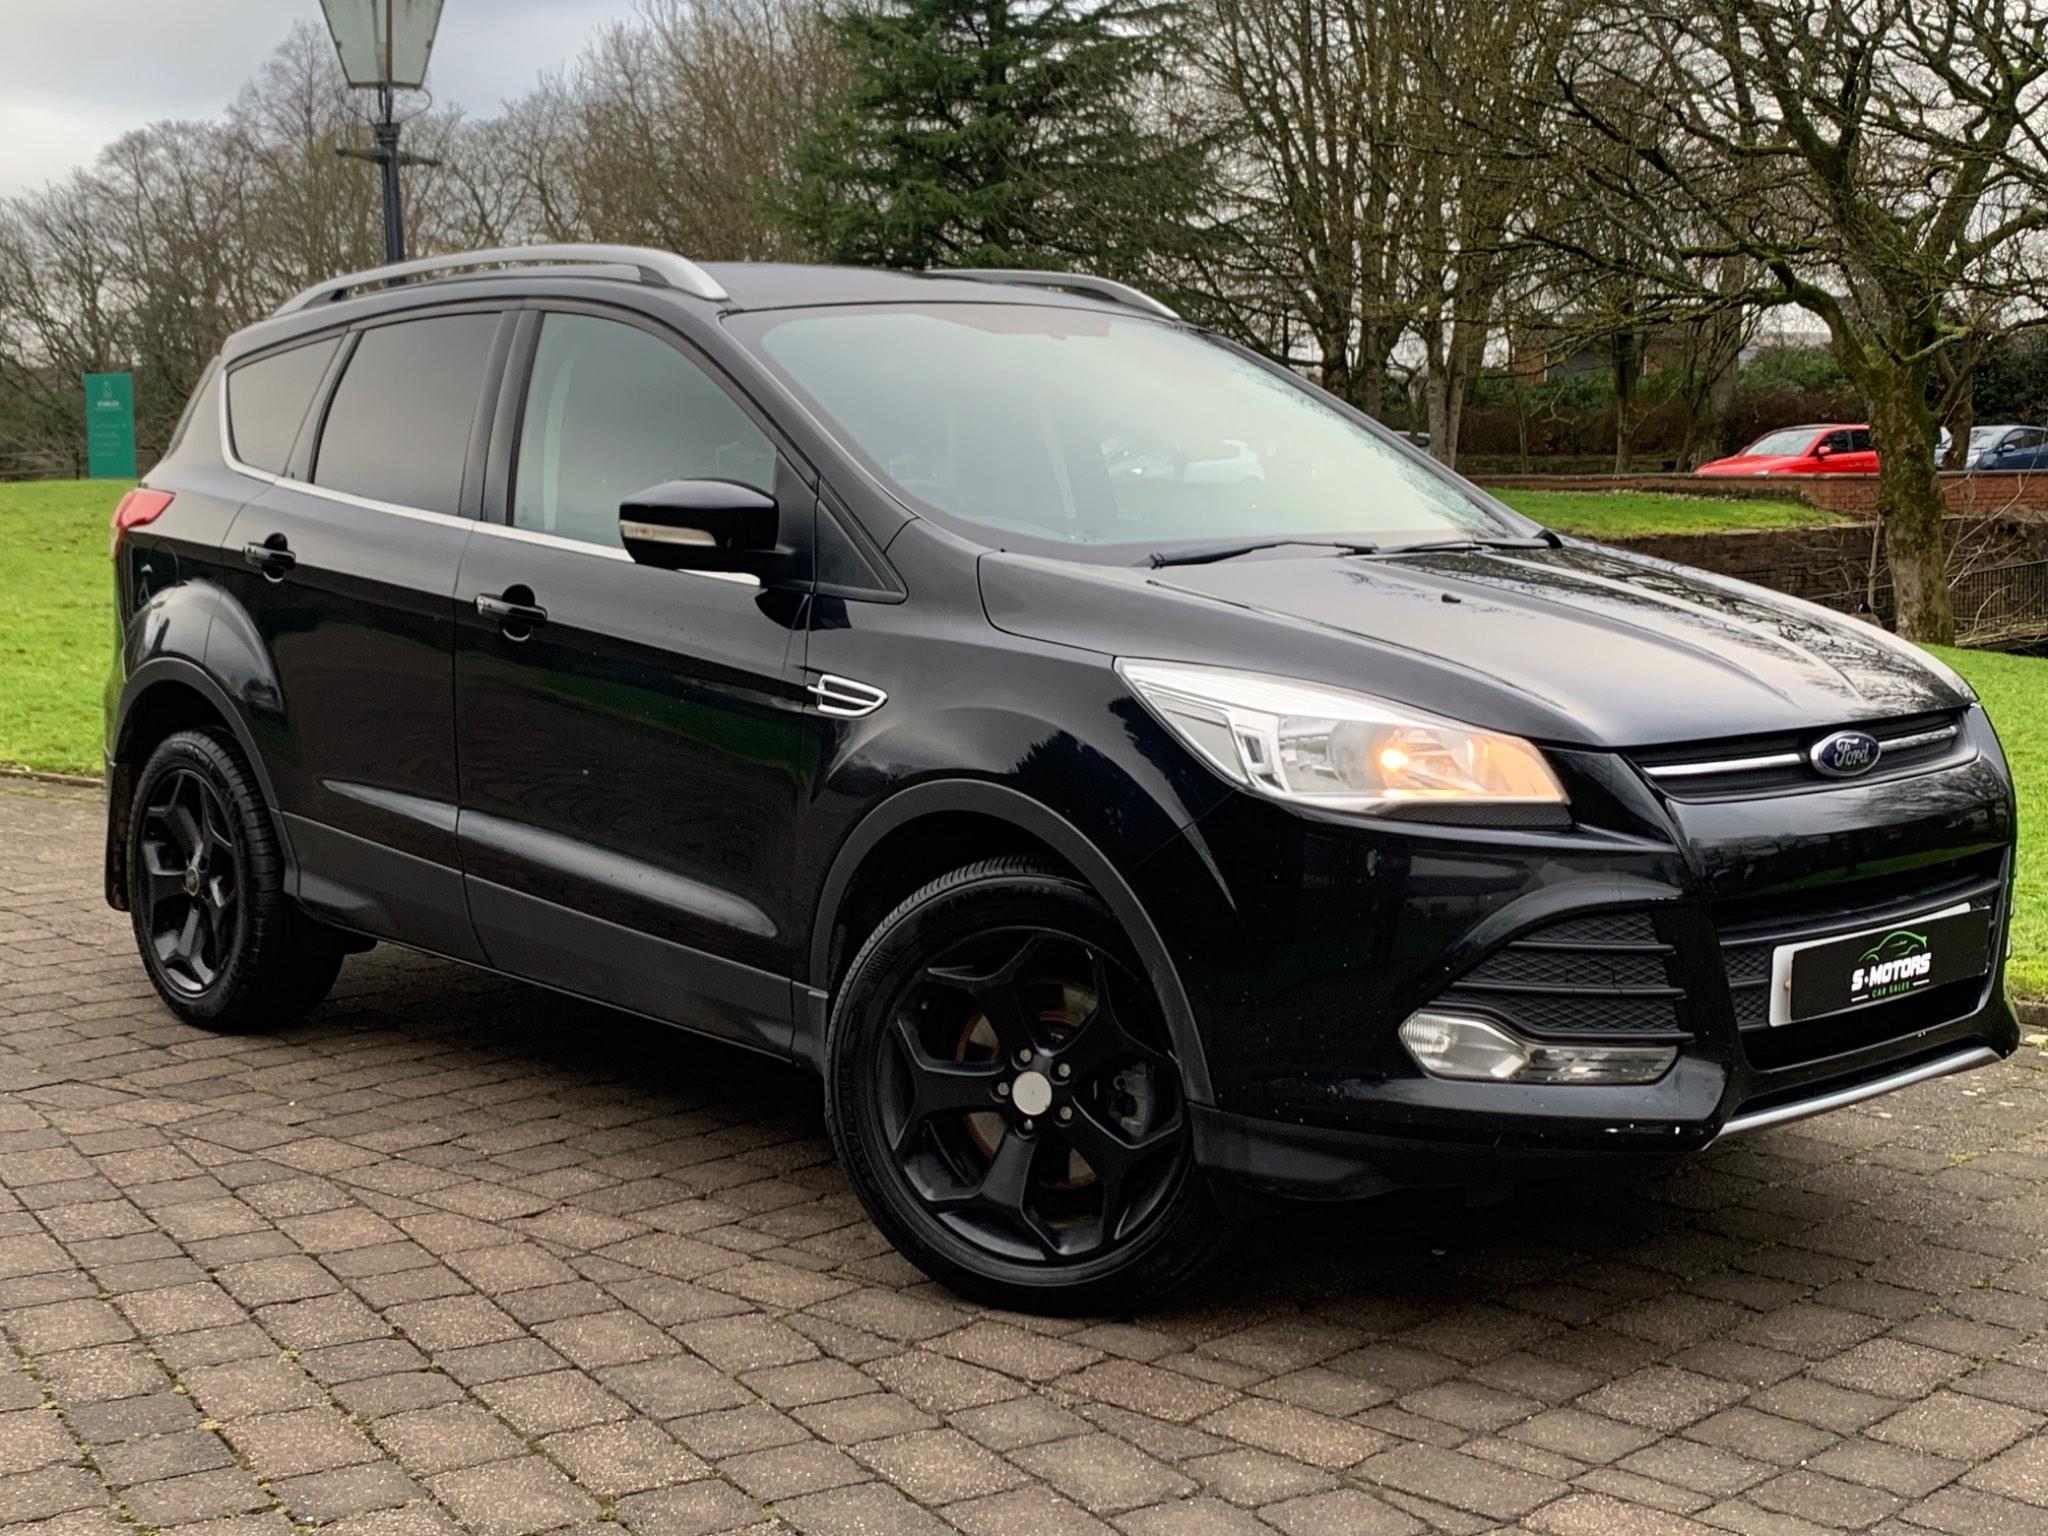 Used Ford Kuga review, Auto Express